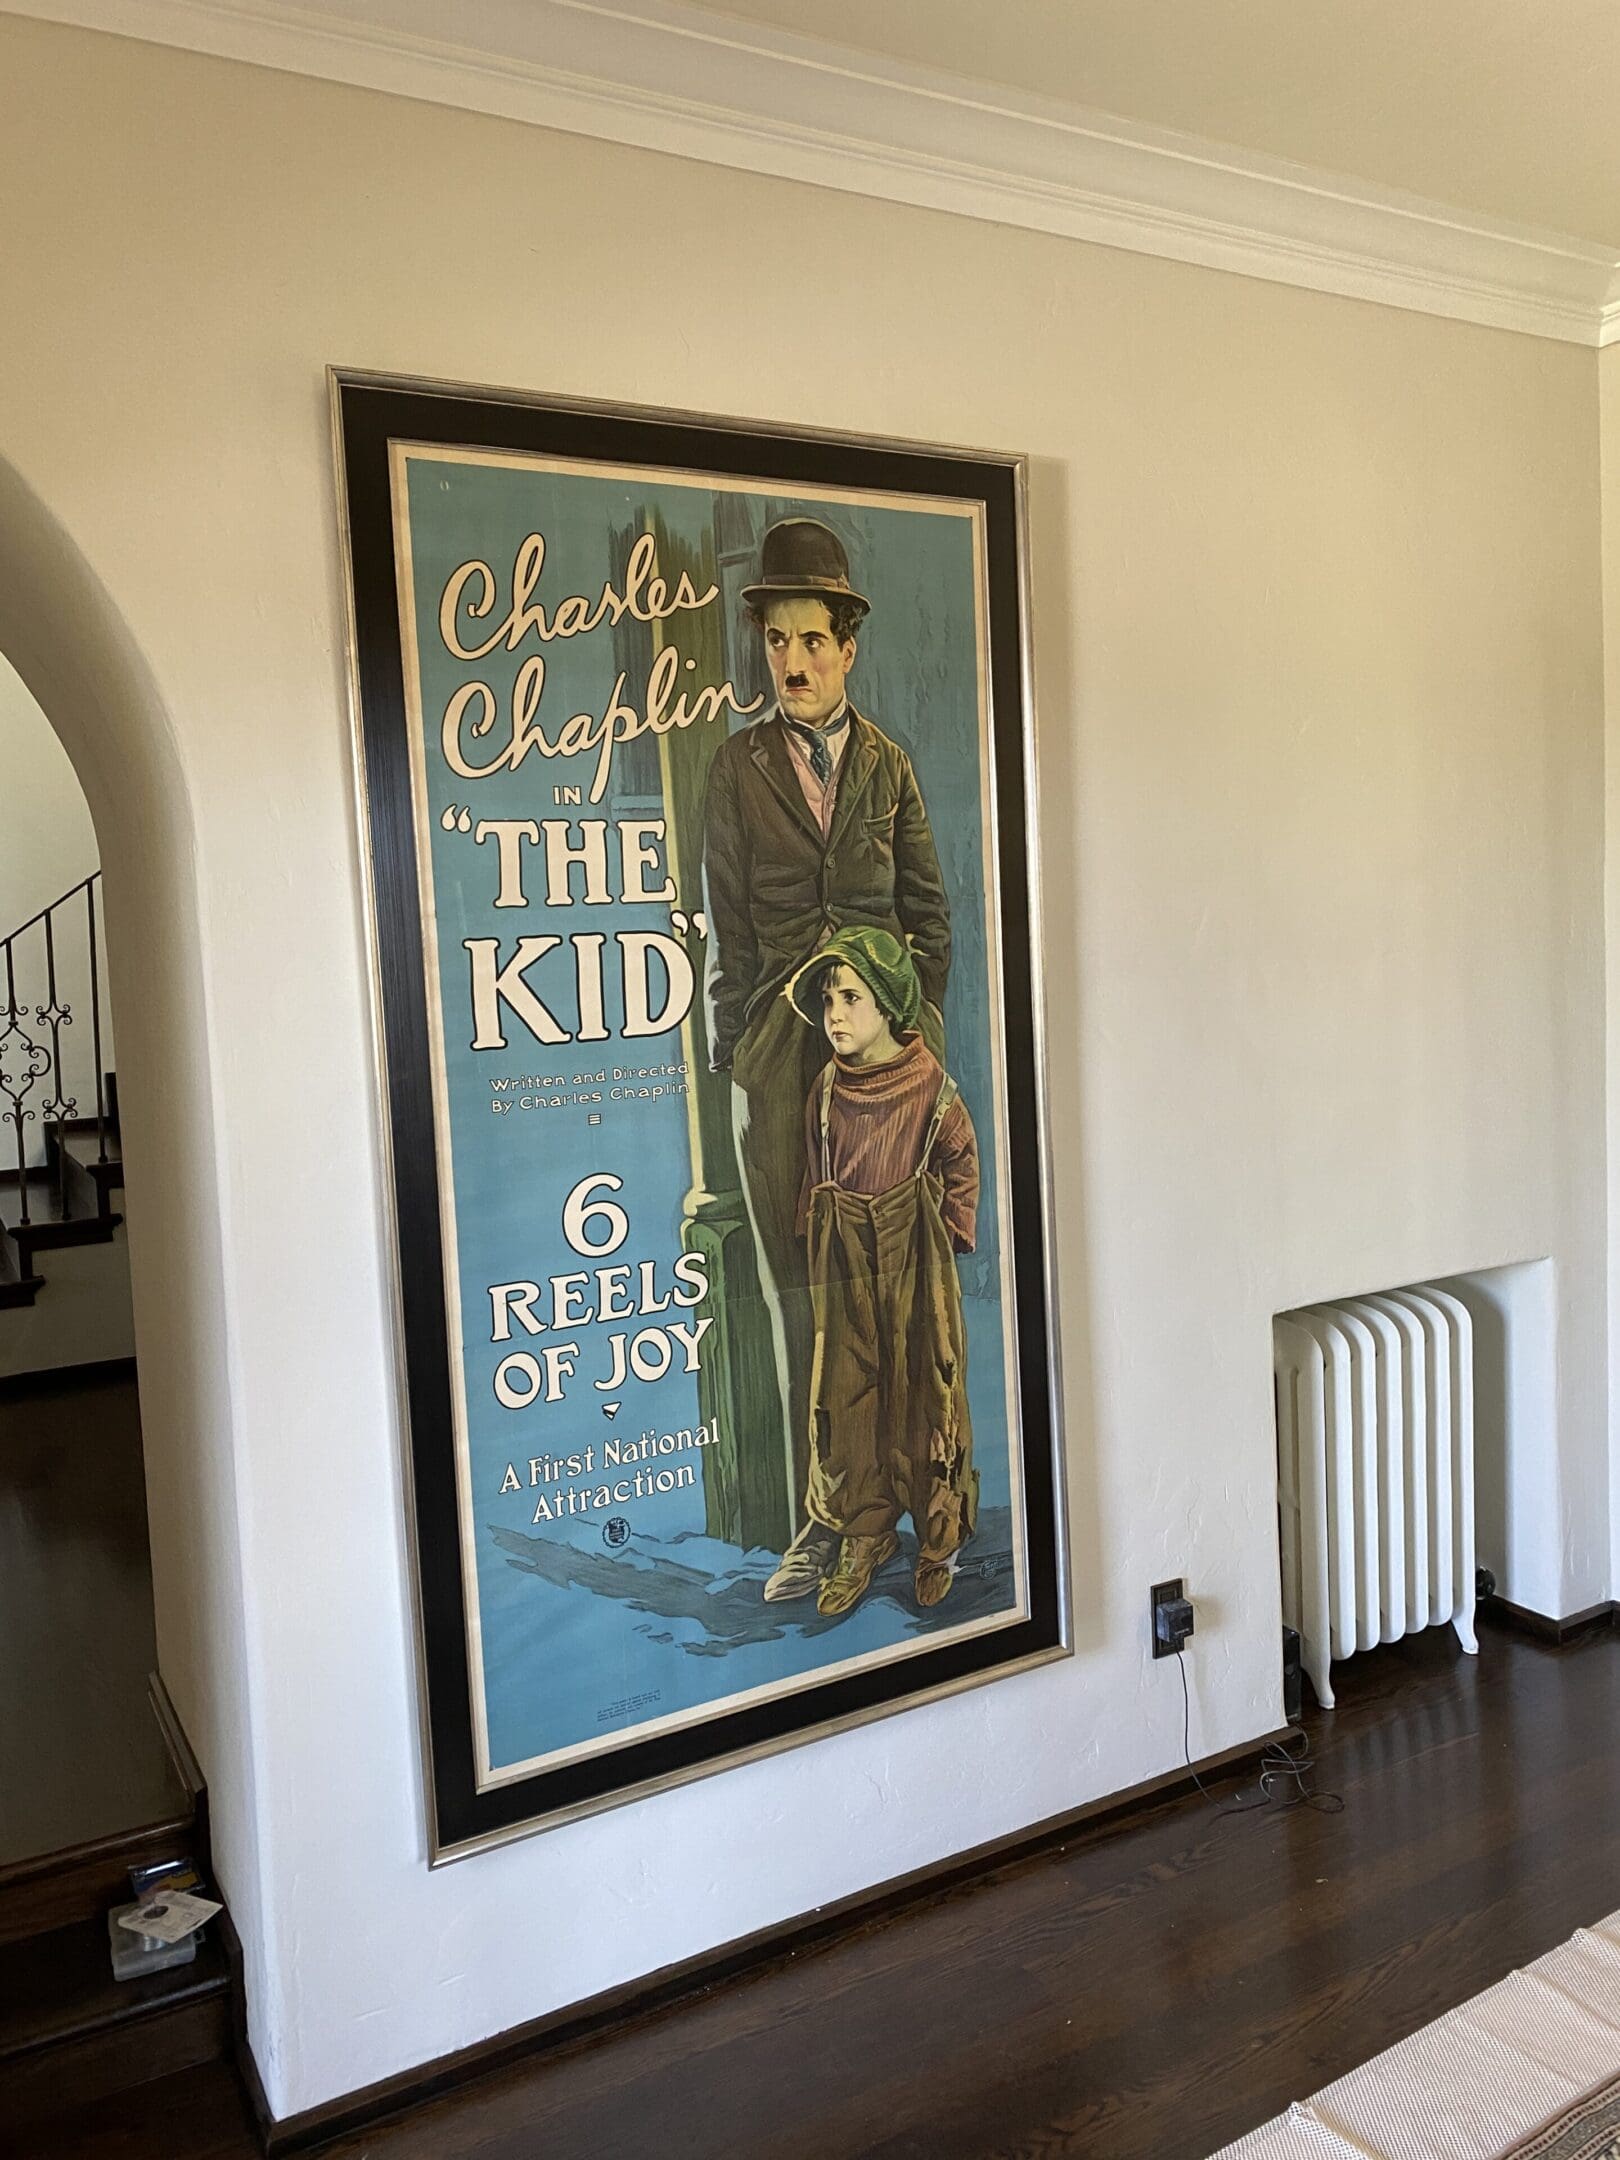 A large poster of chaplin is hanging on the wall.